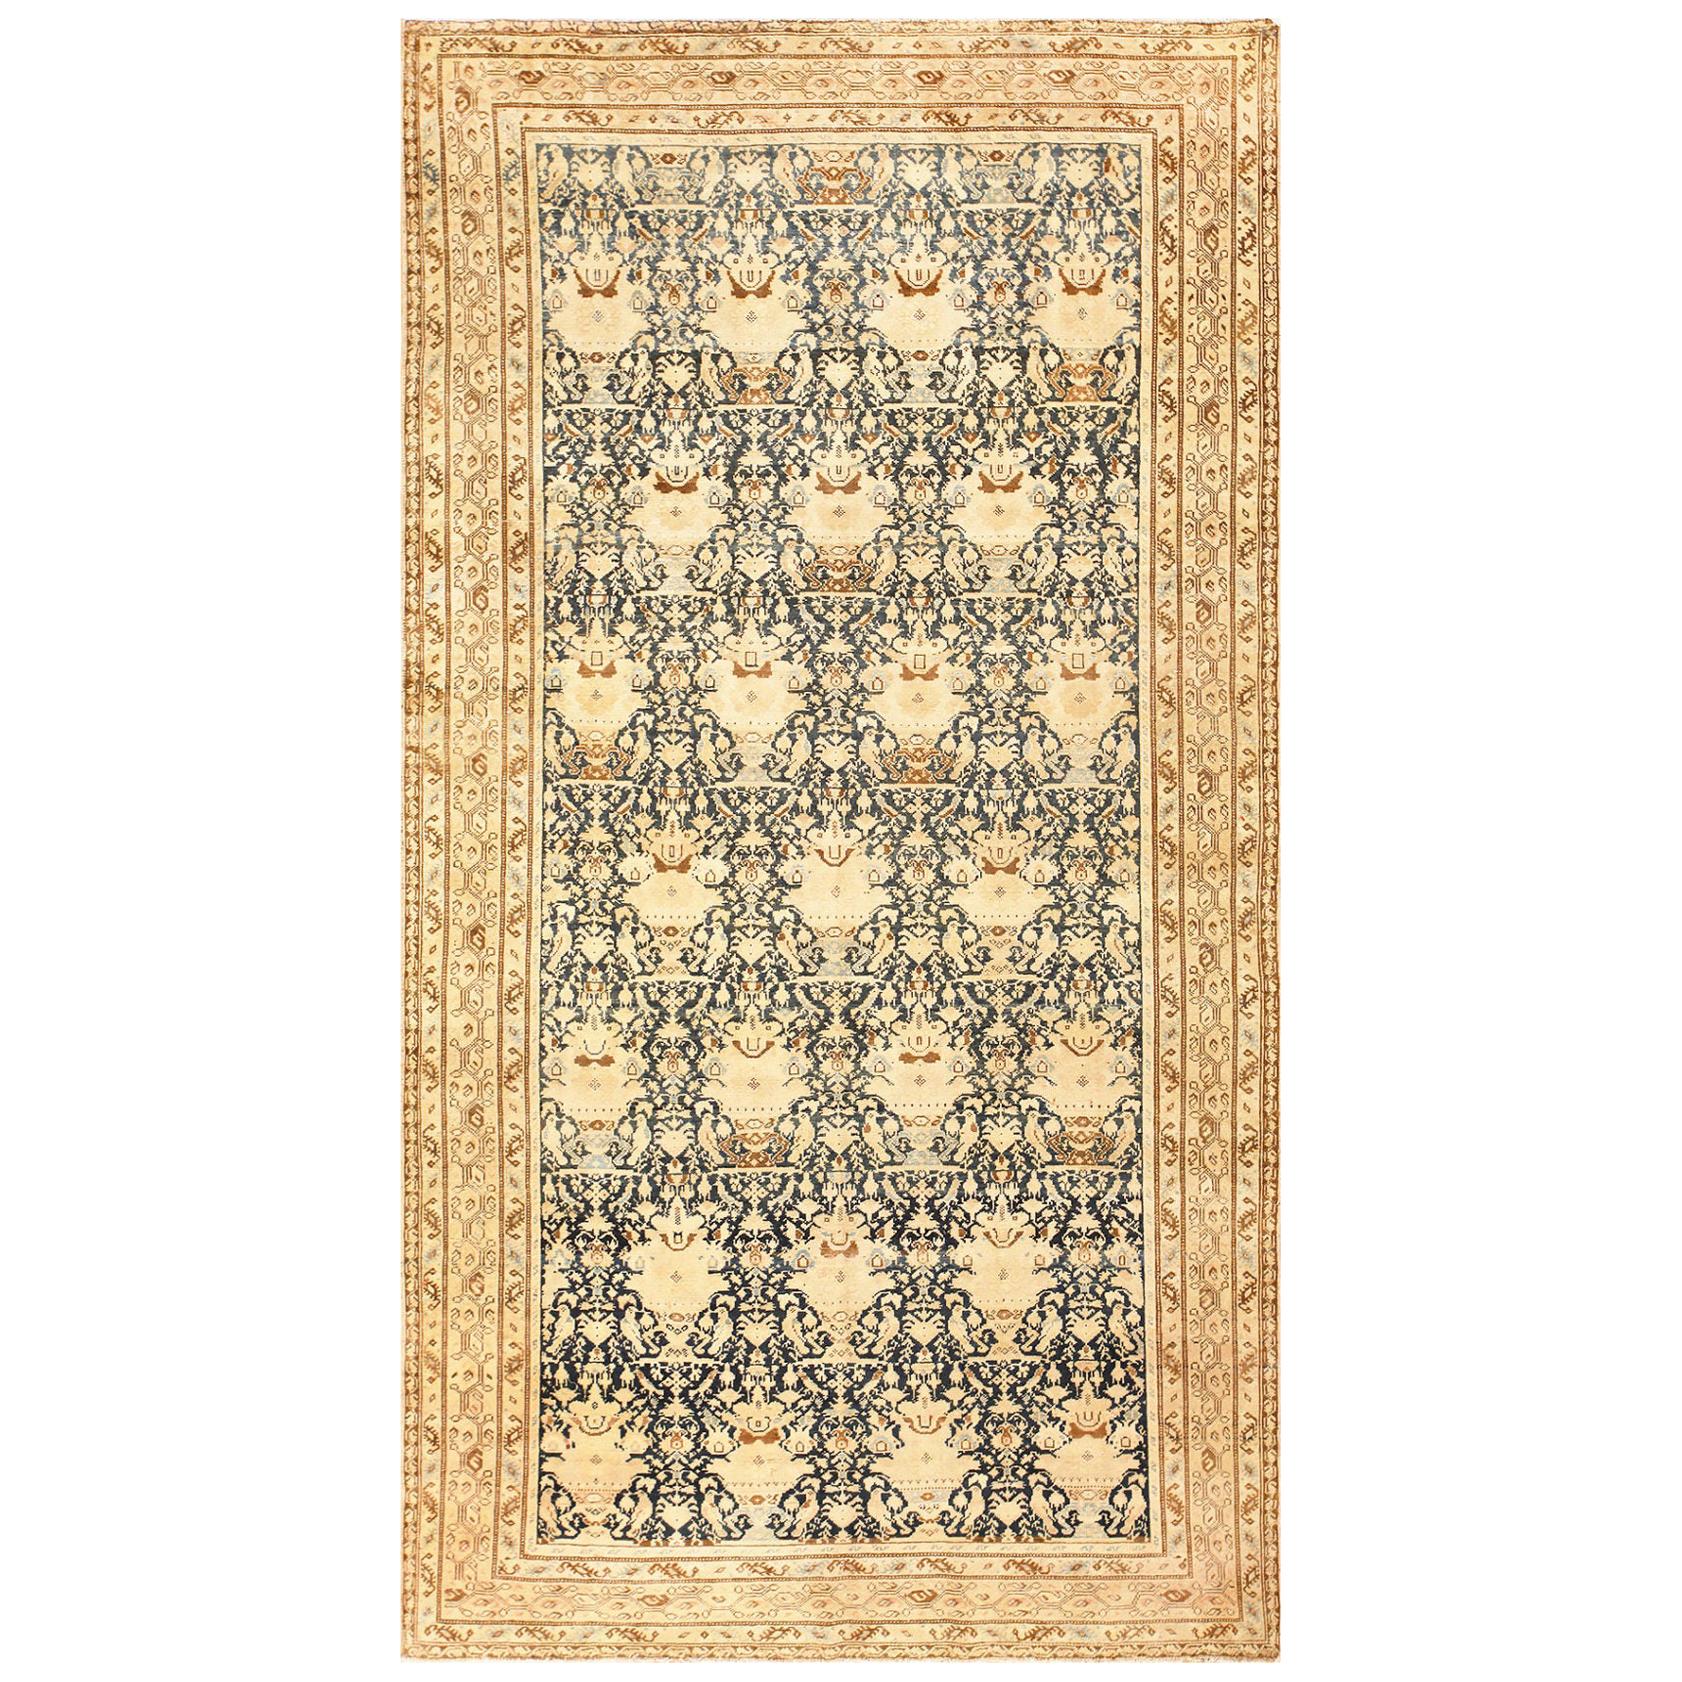 Gallery Size Antique Tribal Persian Malayer Rug. Size: 5 ft x 9 ft 9 in